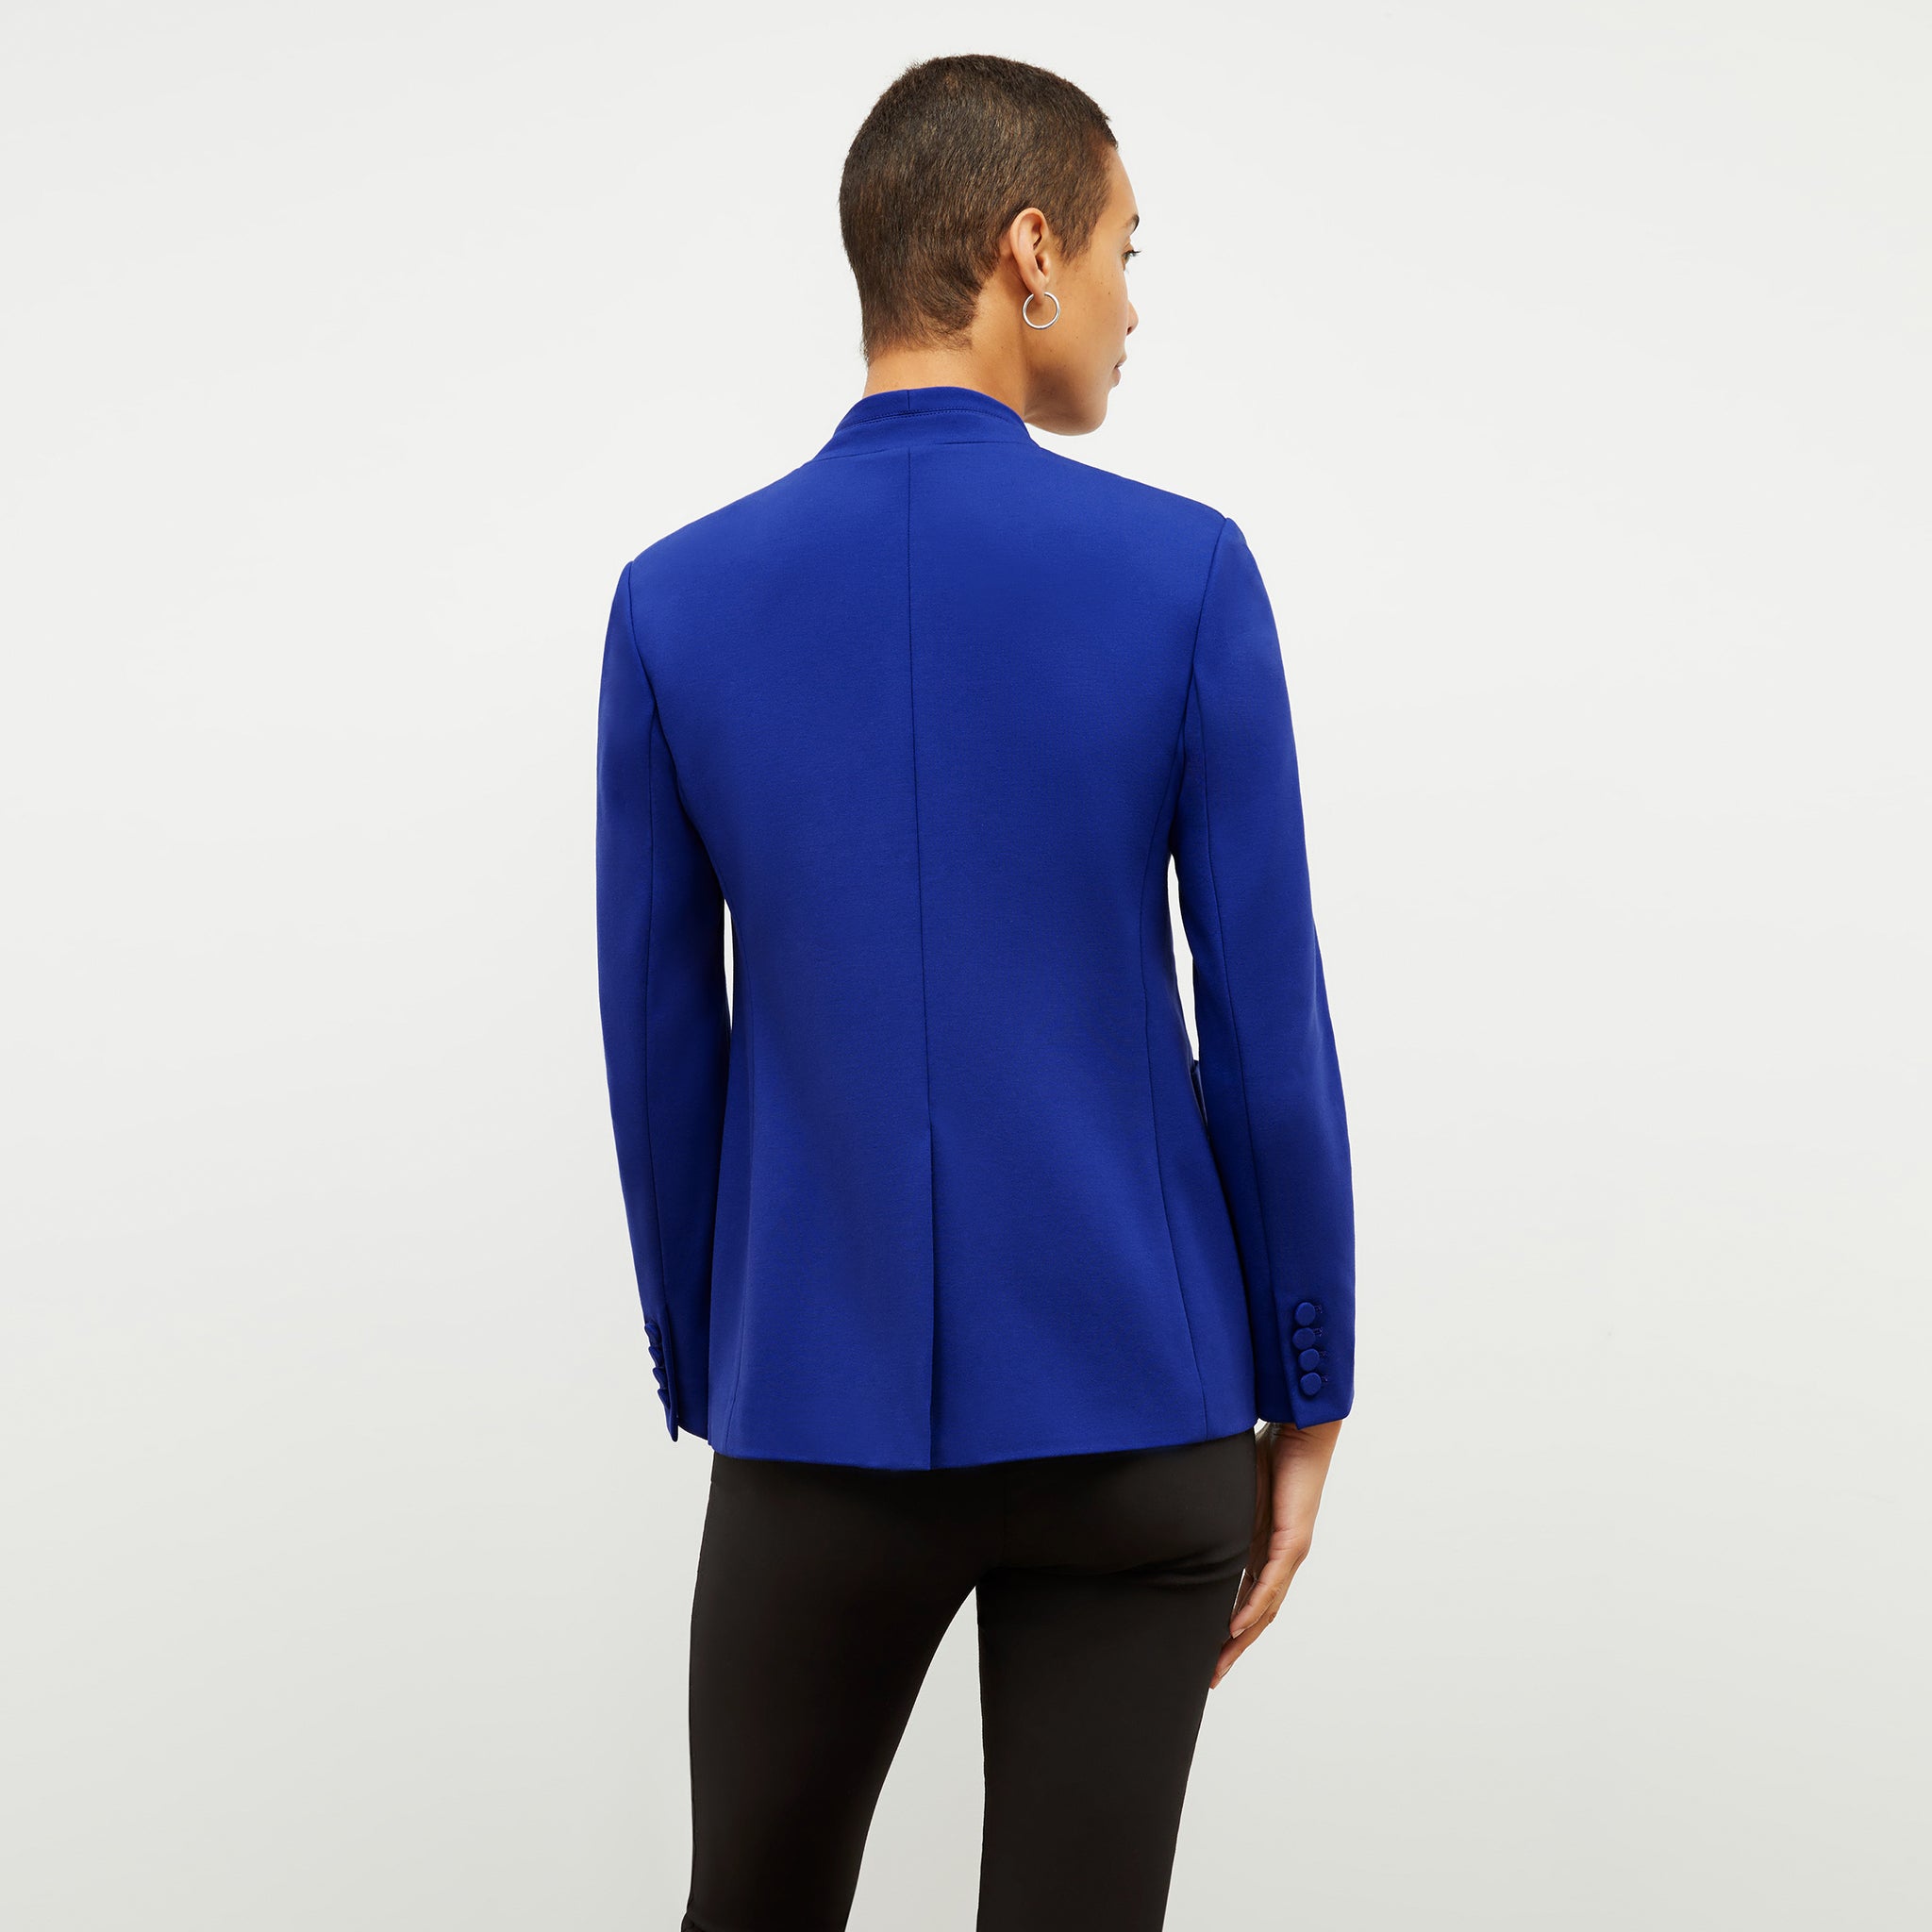 back image of a woman wearing the janette jacket in electric blue